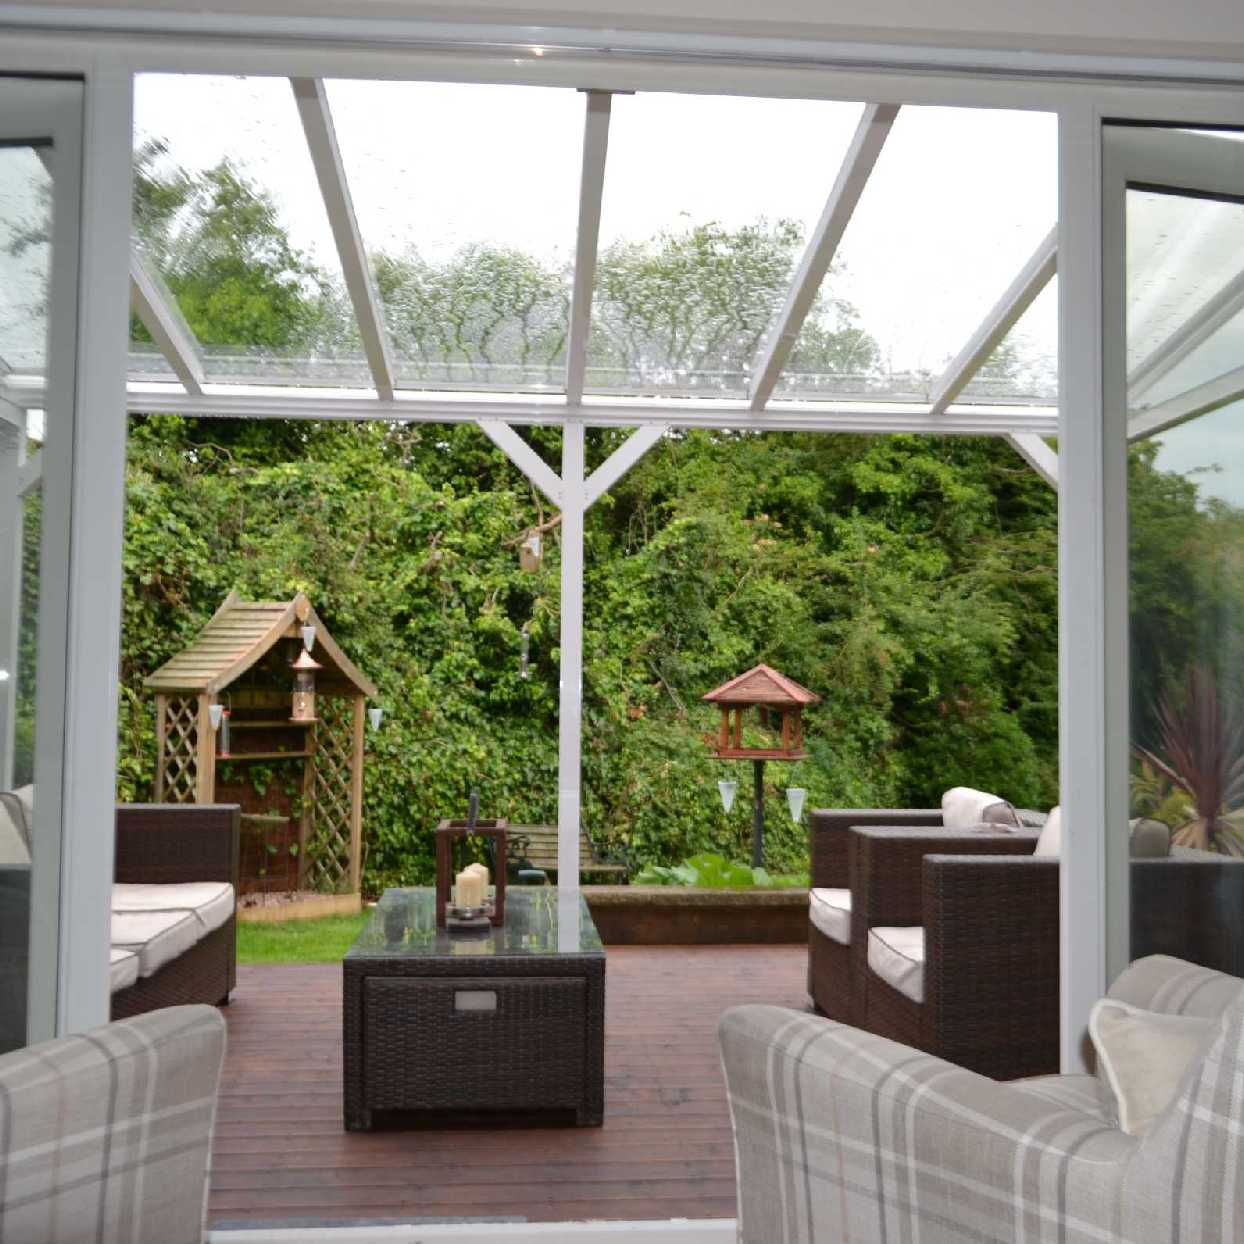 Buy Omega Smart Free-Standing, White MonoPitch Roof Canopy with 6mm Glass Clear Plate Polycarbonate Glazing - 4.9m (W) x 3.5m (P), (6) Supporting Posts online today